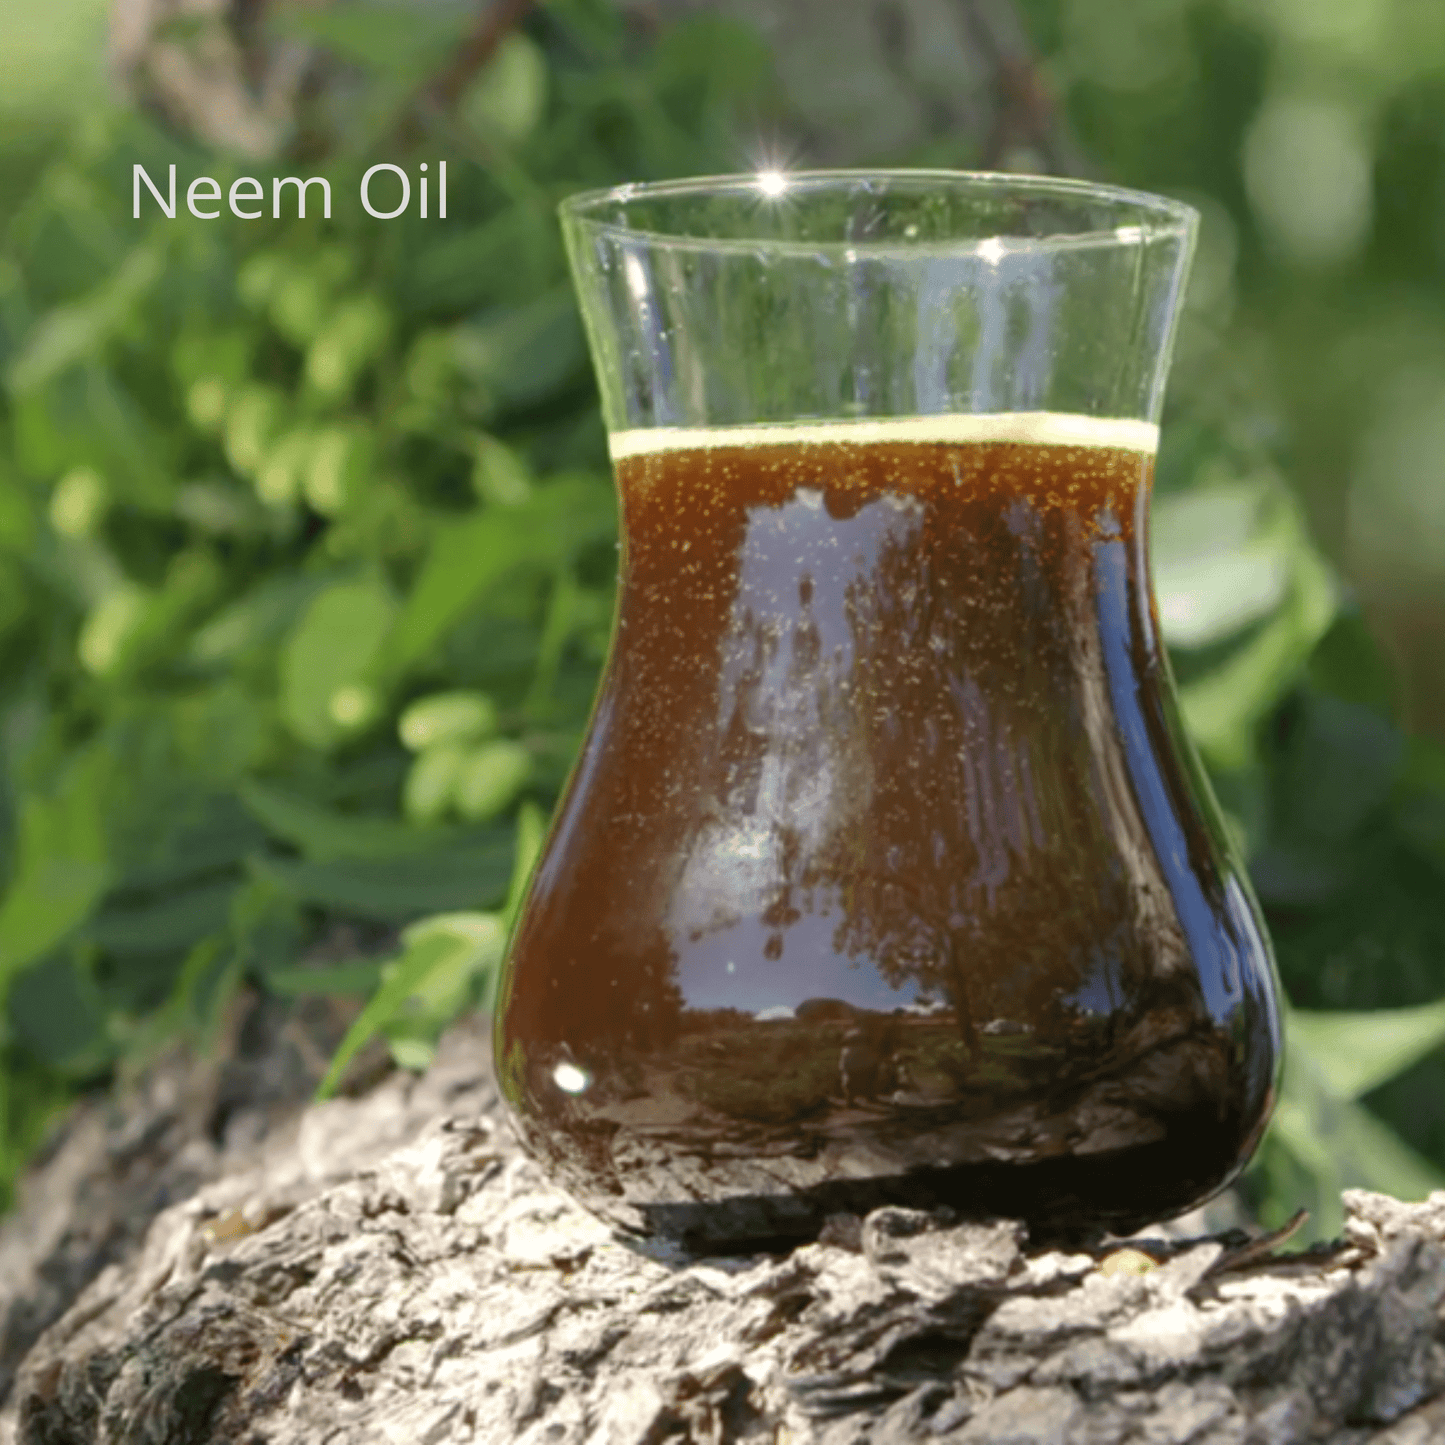 Be Green Bath and Body Hair Oil contains neem oil